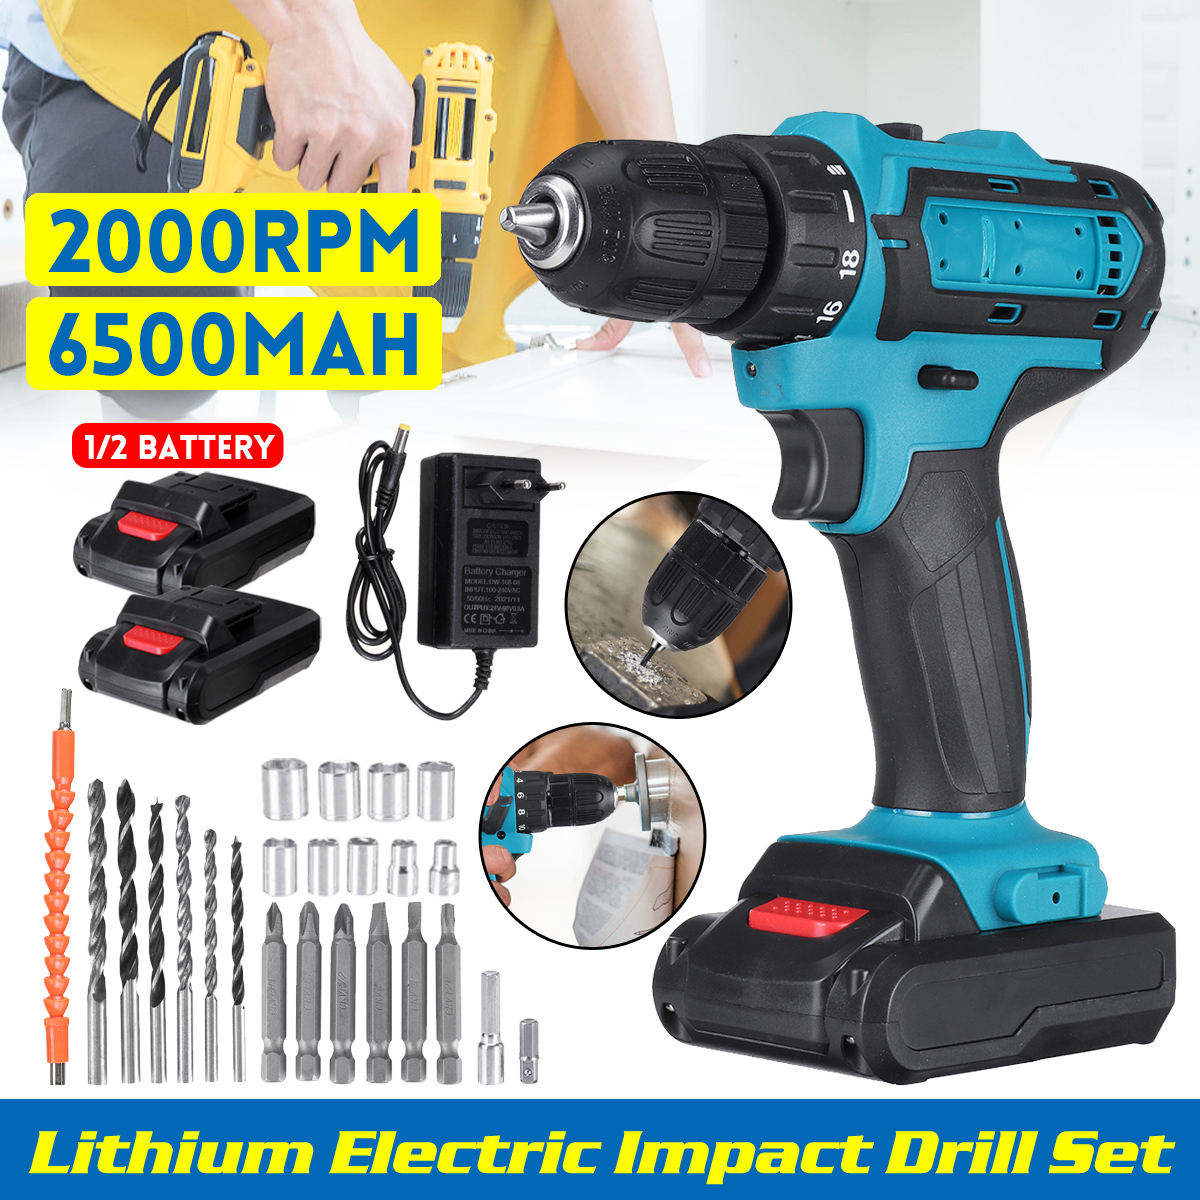 2000rpm-38Nm-21V-Lithium-Electric-Impact-Hammer-Drill-Wood-Drilling-Screwdrivers-with-Battery-1943477-1